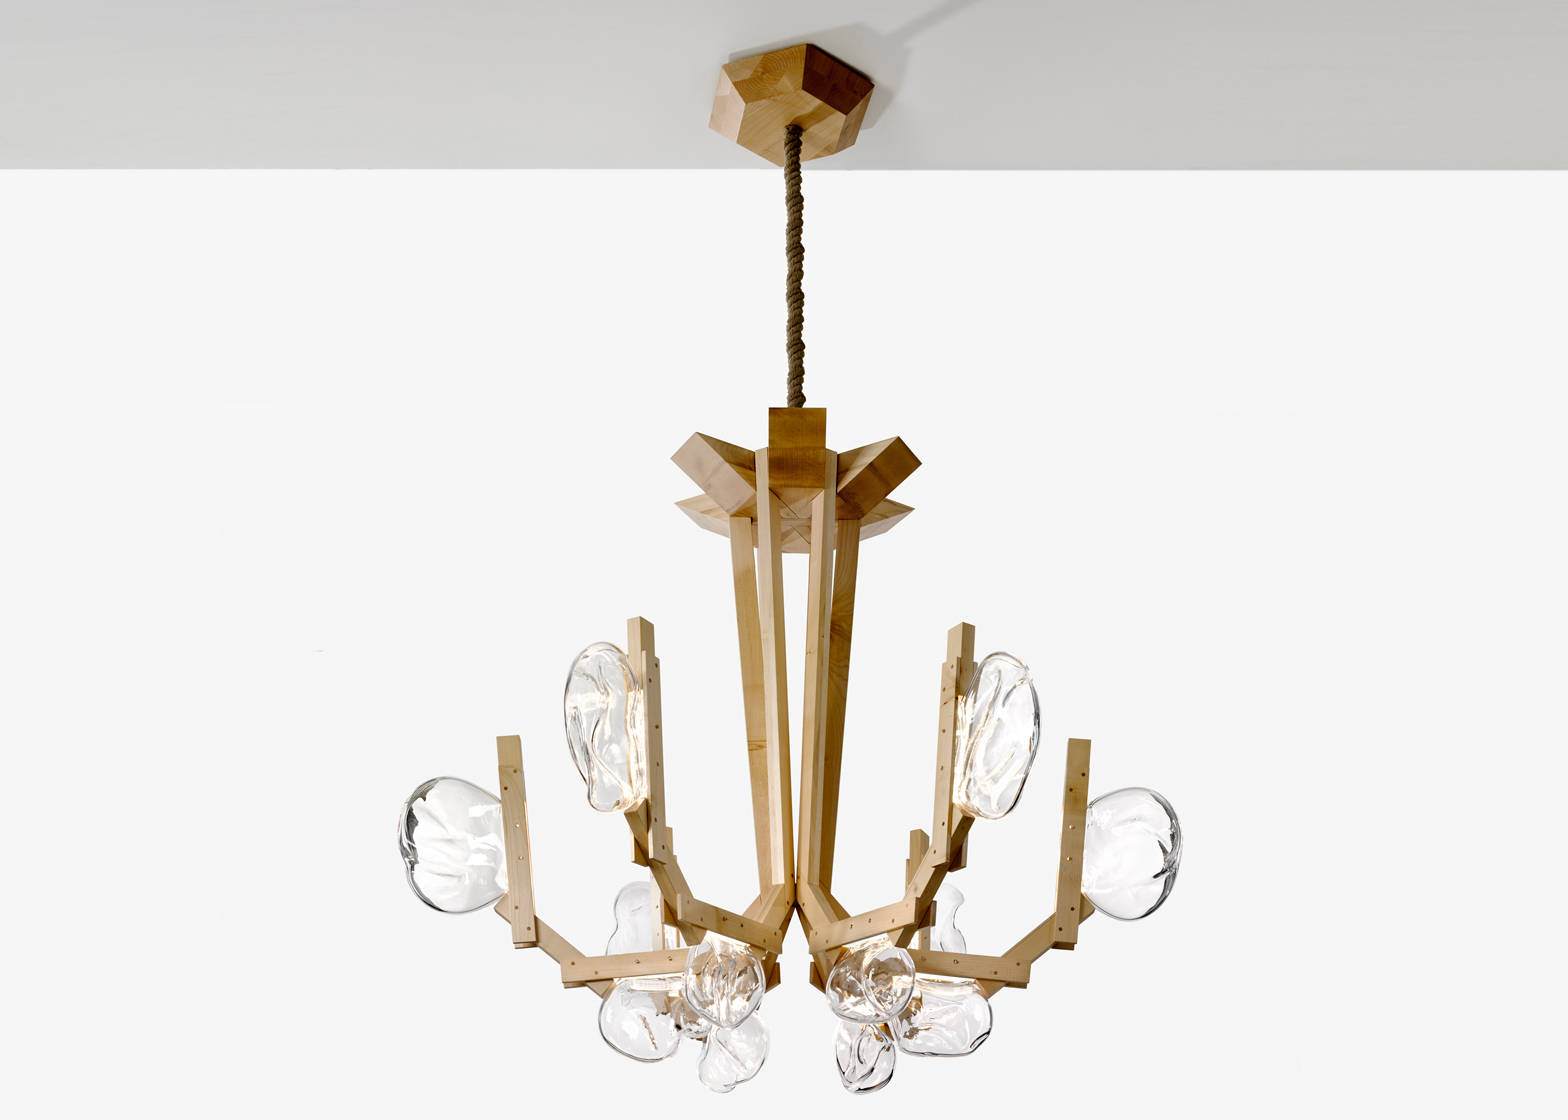 Fungo chandelier inspired by mushrooms growing on wood  1